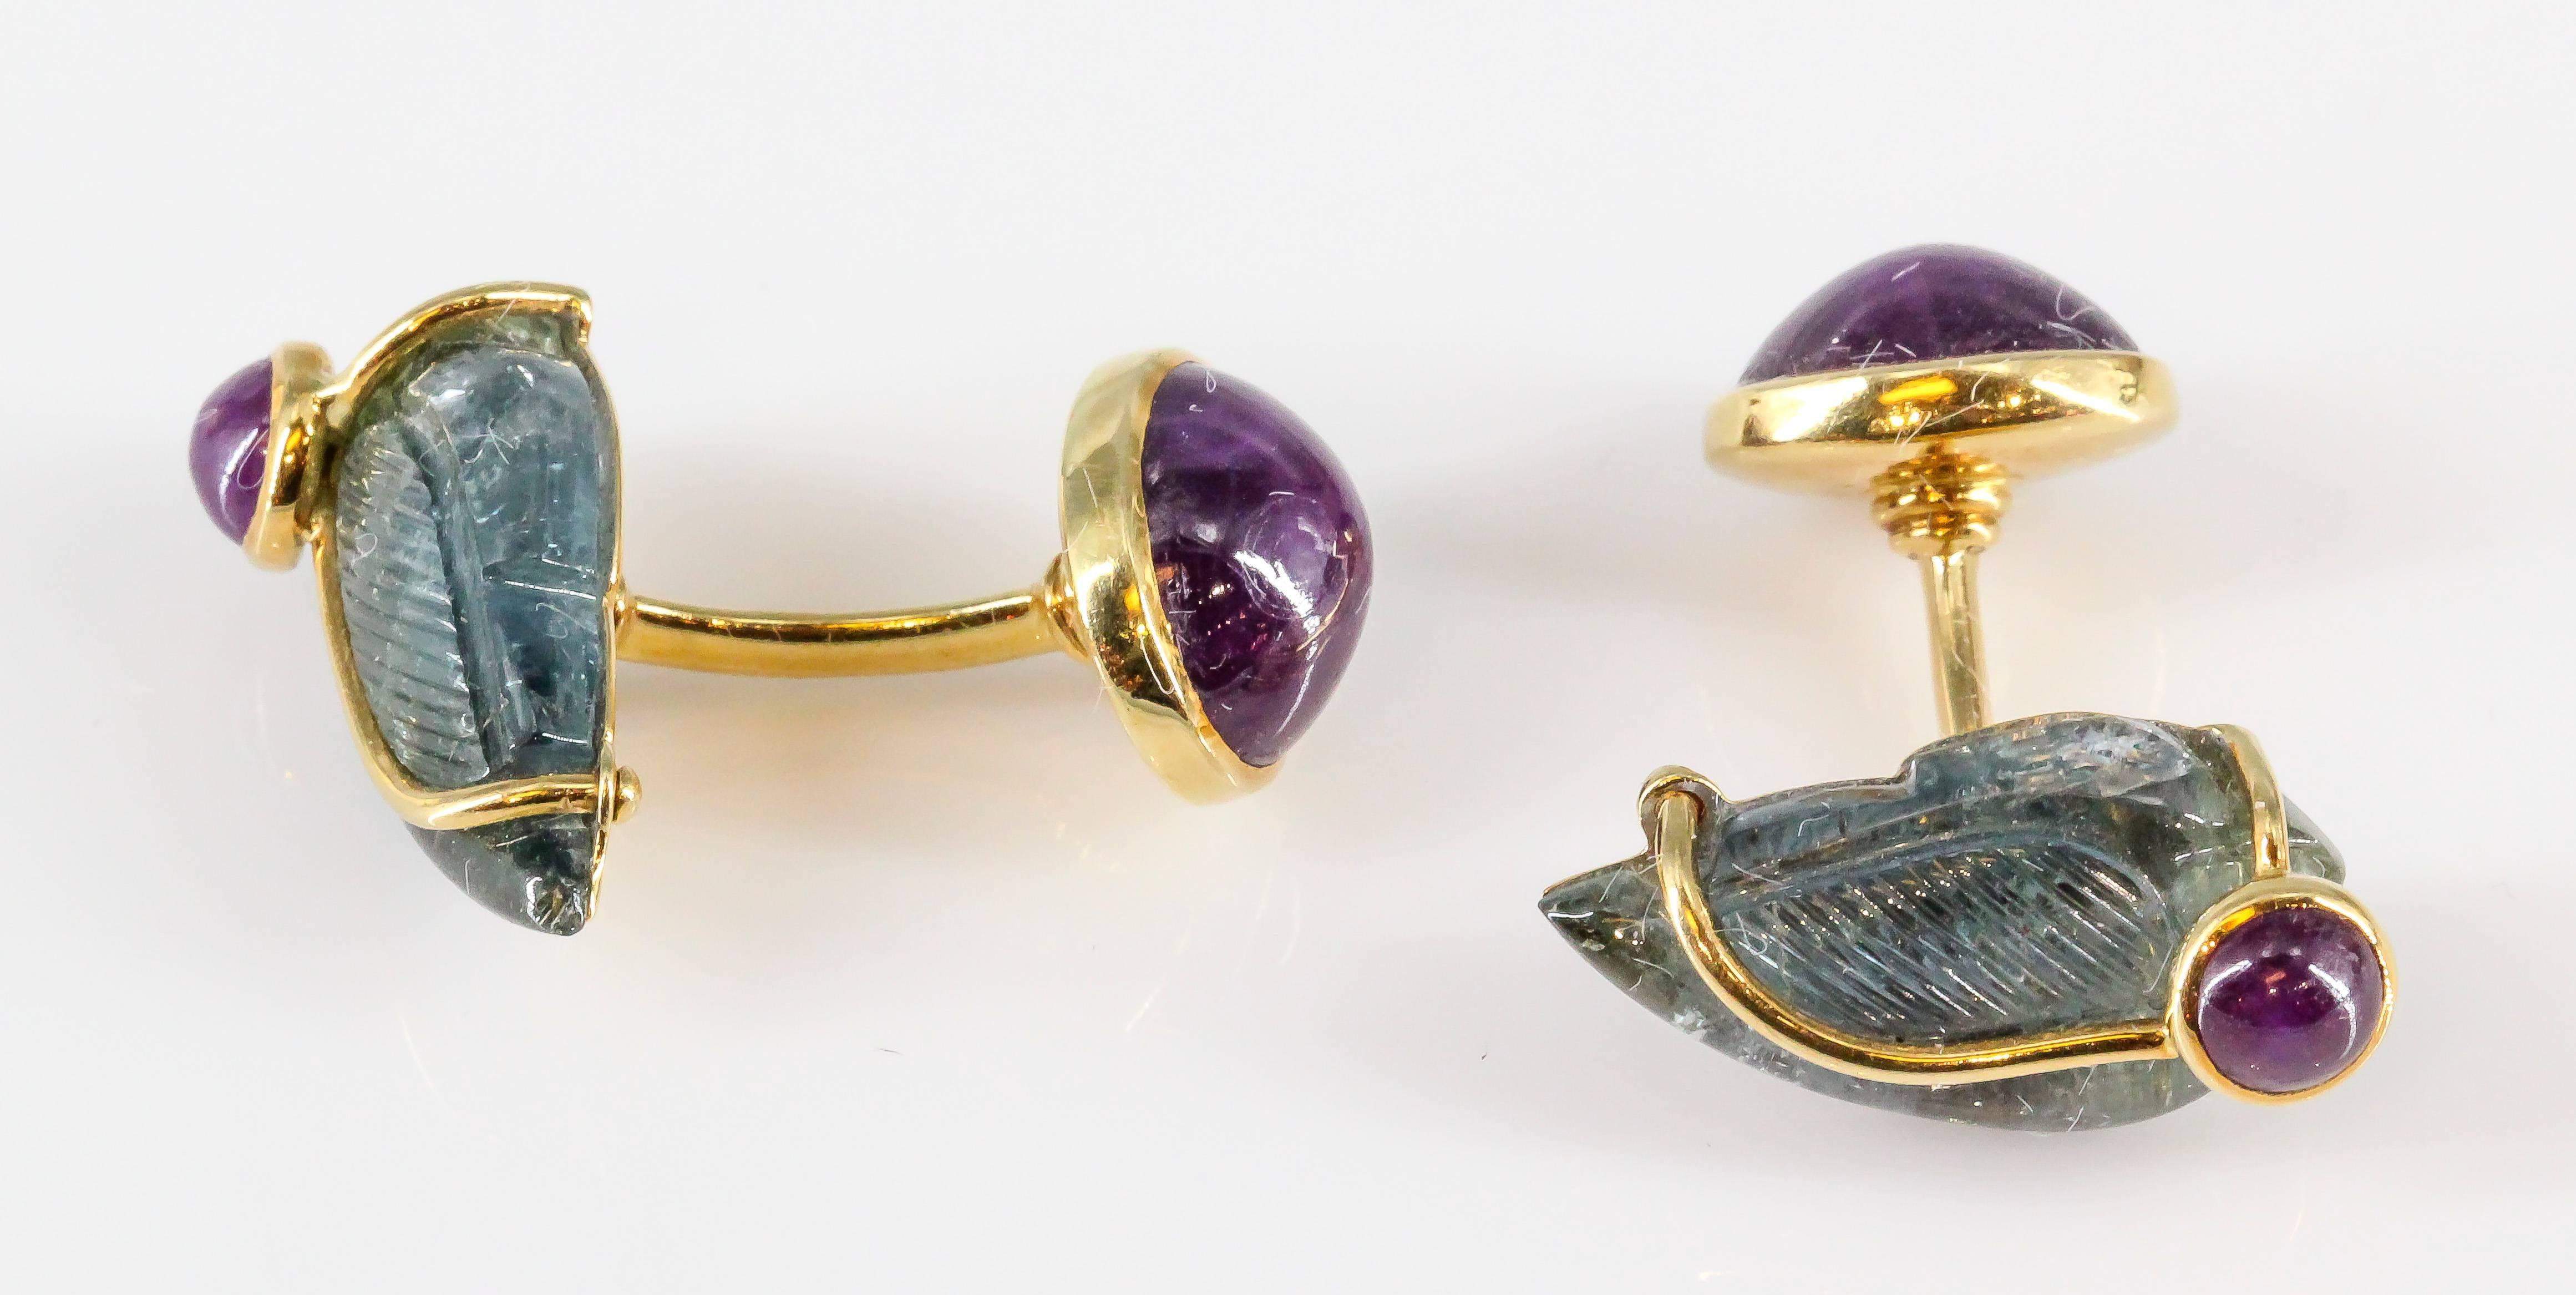 Elegant and unusual ruby, carved aquamarine and 18K yellow gold cufflinks by Seaman Schepps. They feature rich red cabochon rubies with a carved aquamarine resembling a wing. Beautifully made and easy to wear.

Hallmarks: Seaman Schepps, copyright,